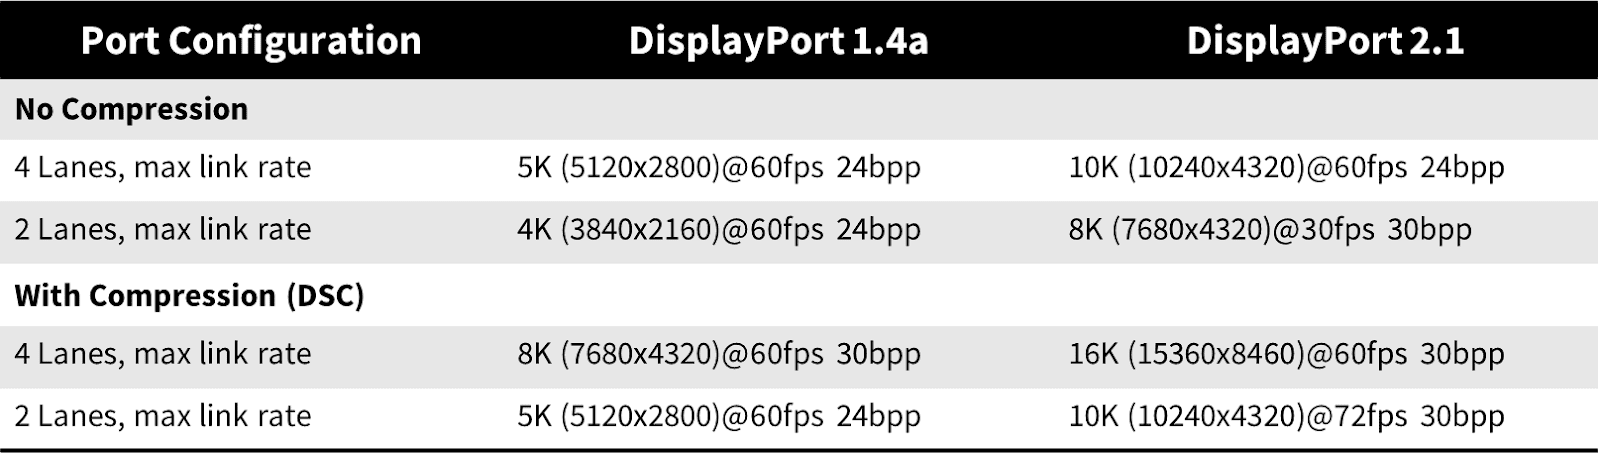 Table that shows the differences in display capabilities of DisplayPort™ 1.4 vs 2.1